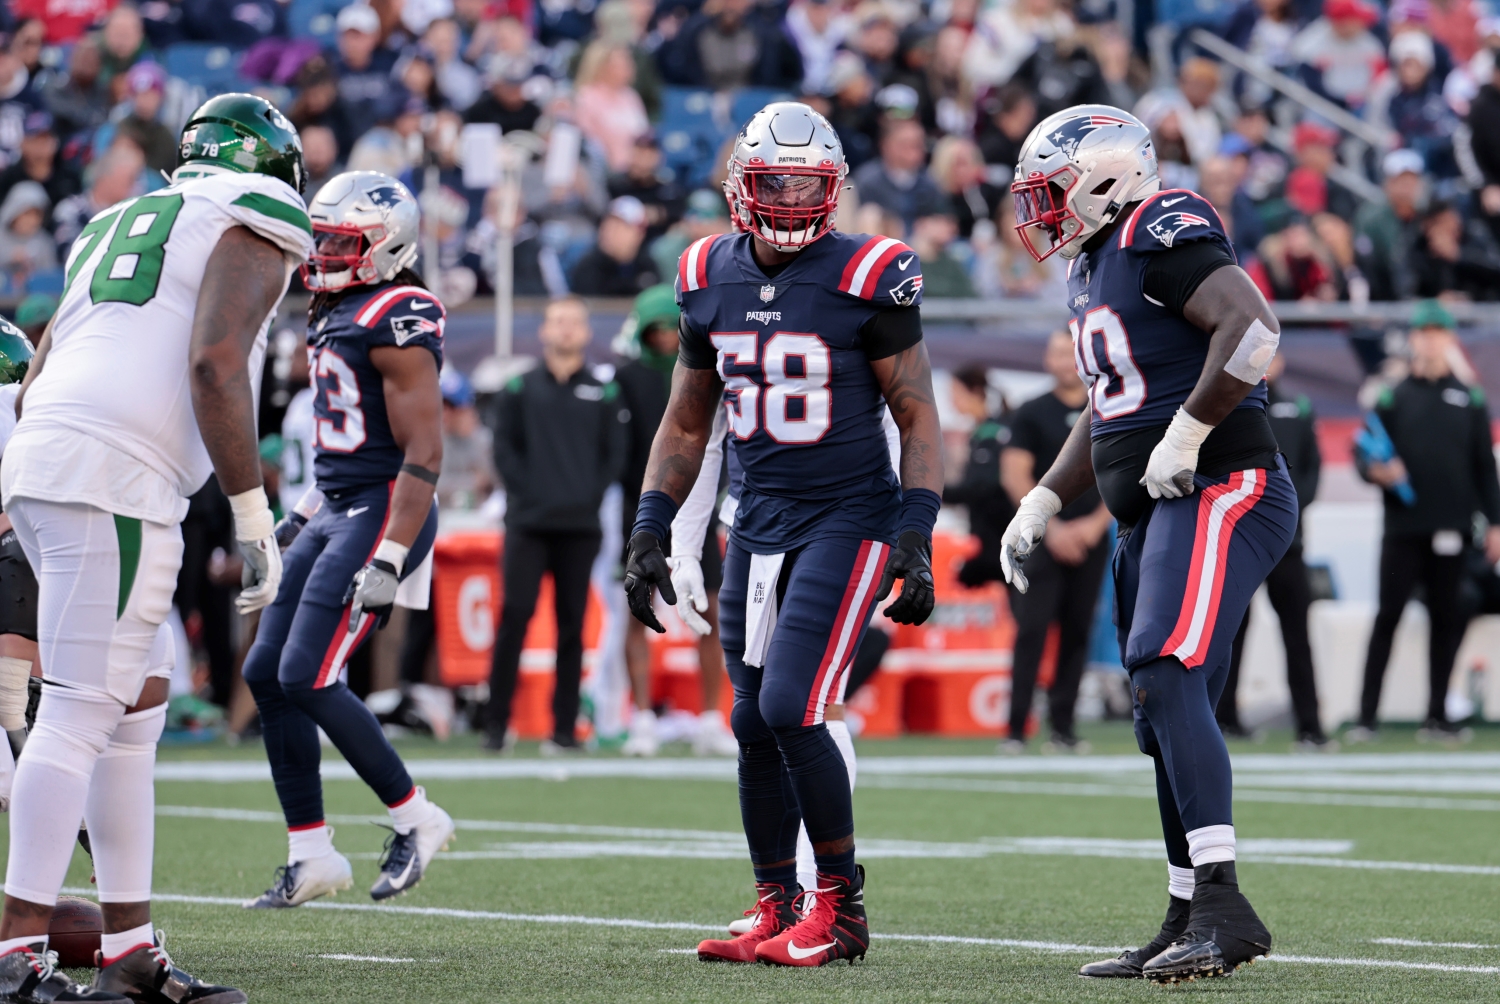 New England Patriots linebacker Jamie Collins Sr. speaks to defensive tackle Christian Barmore before a play against the New York Jets.